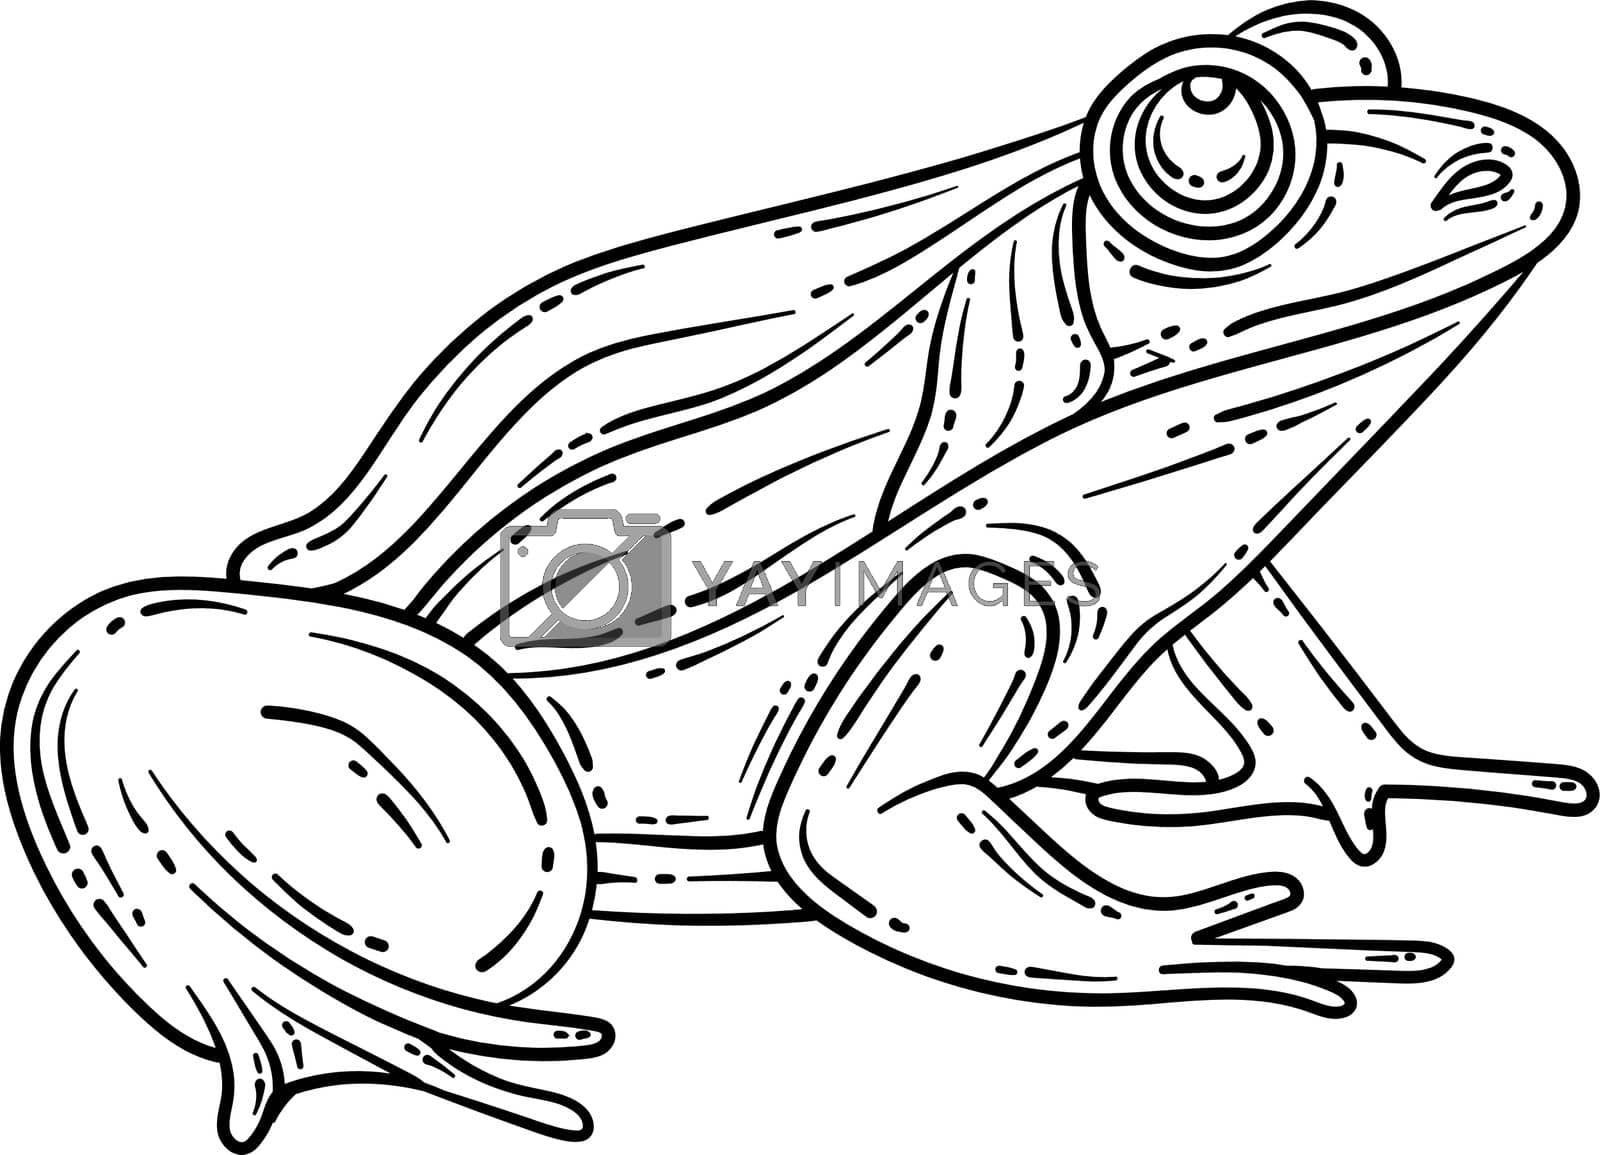 Royalty free image of Frog Spring Coloring Page for Adults by abbydesign